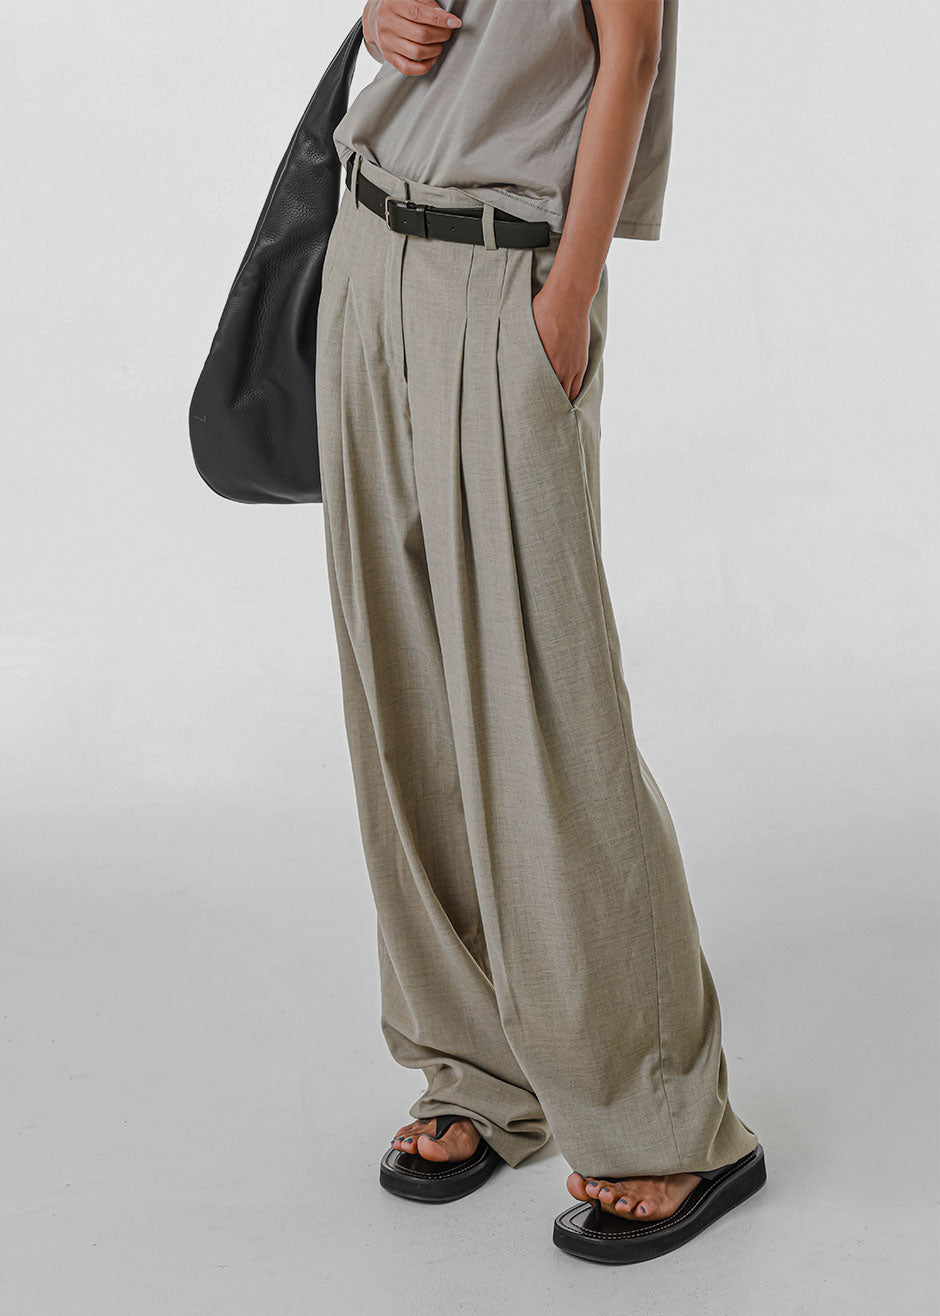 Gelso Pleated Trousers - Light Taupe Melange